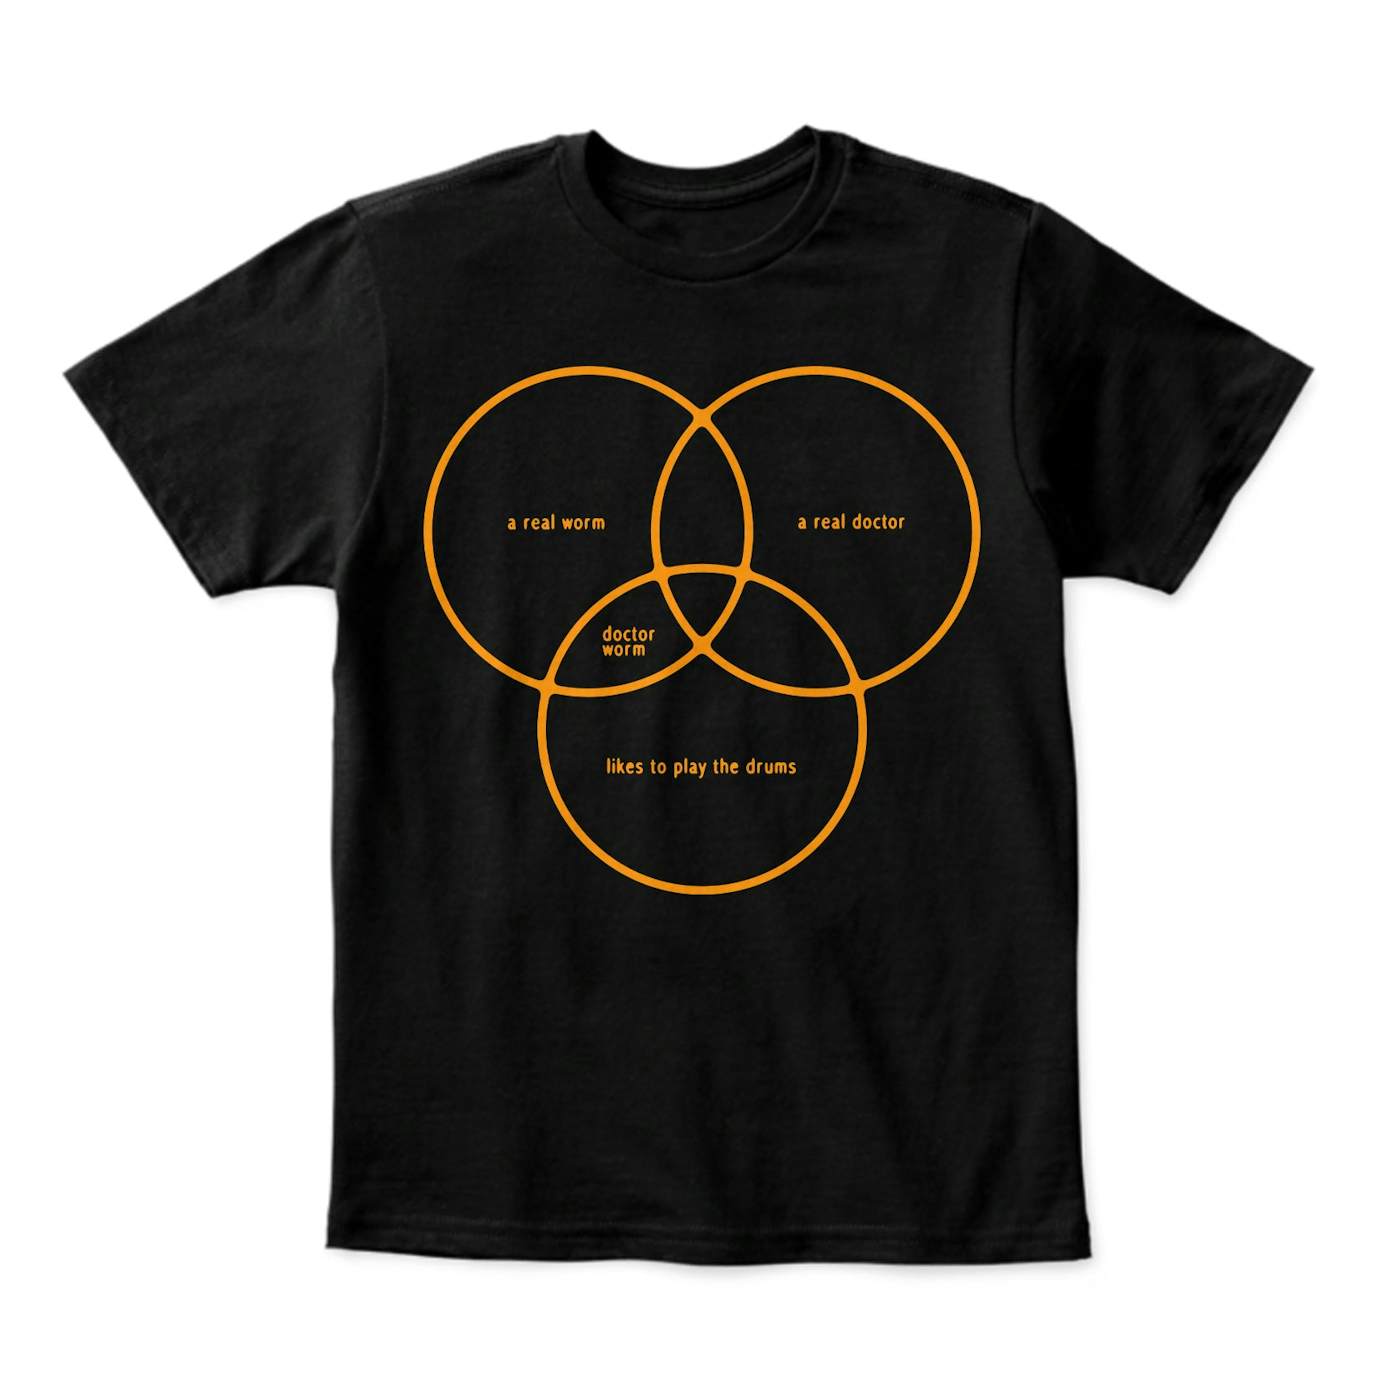 They Might Be Giants Dr. Worm T-Shirt Black + Orange (Unisex)